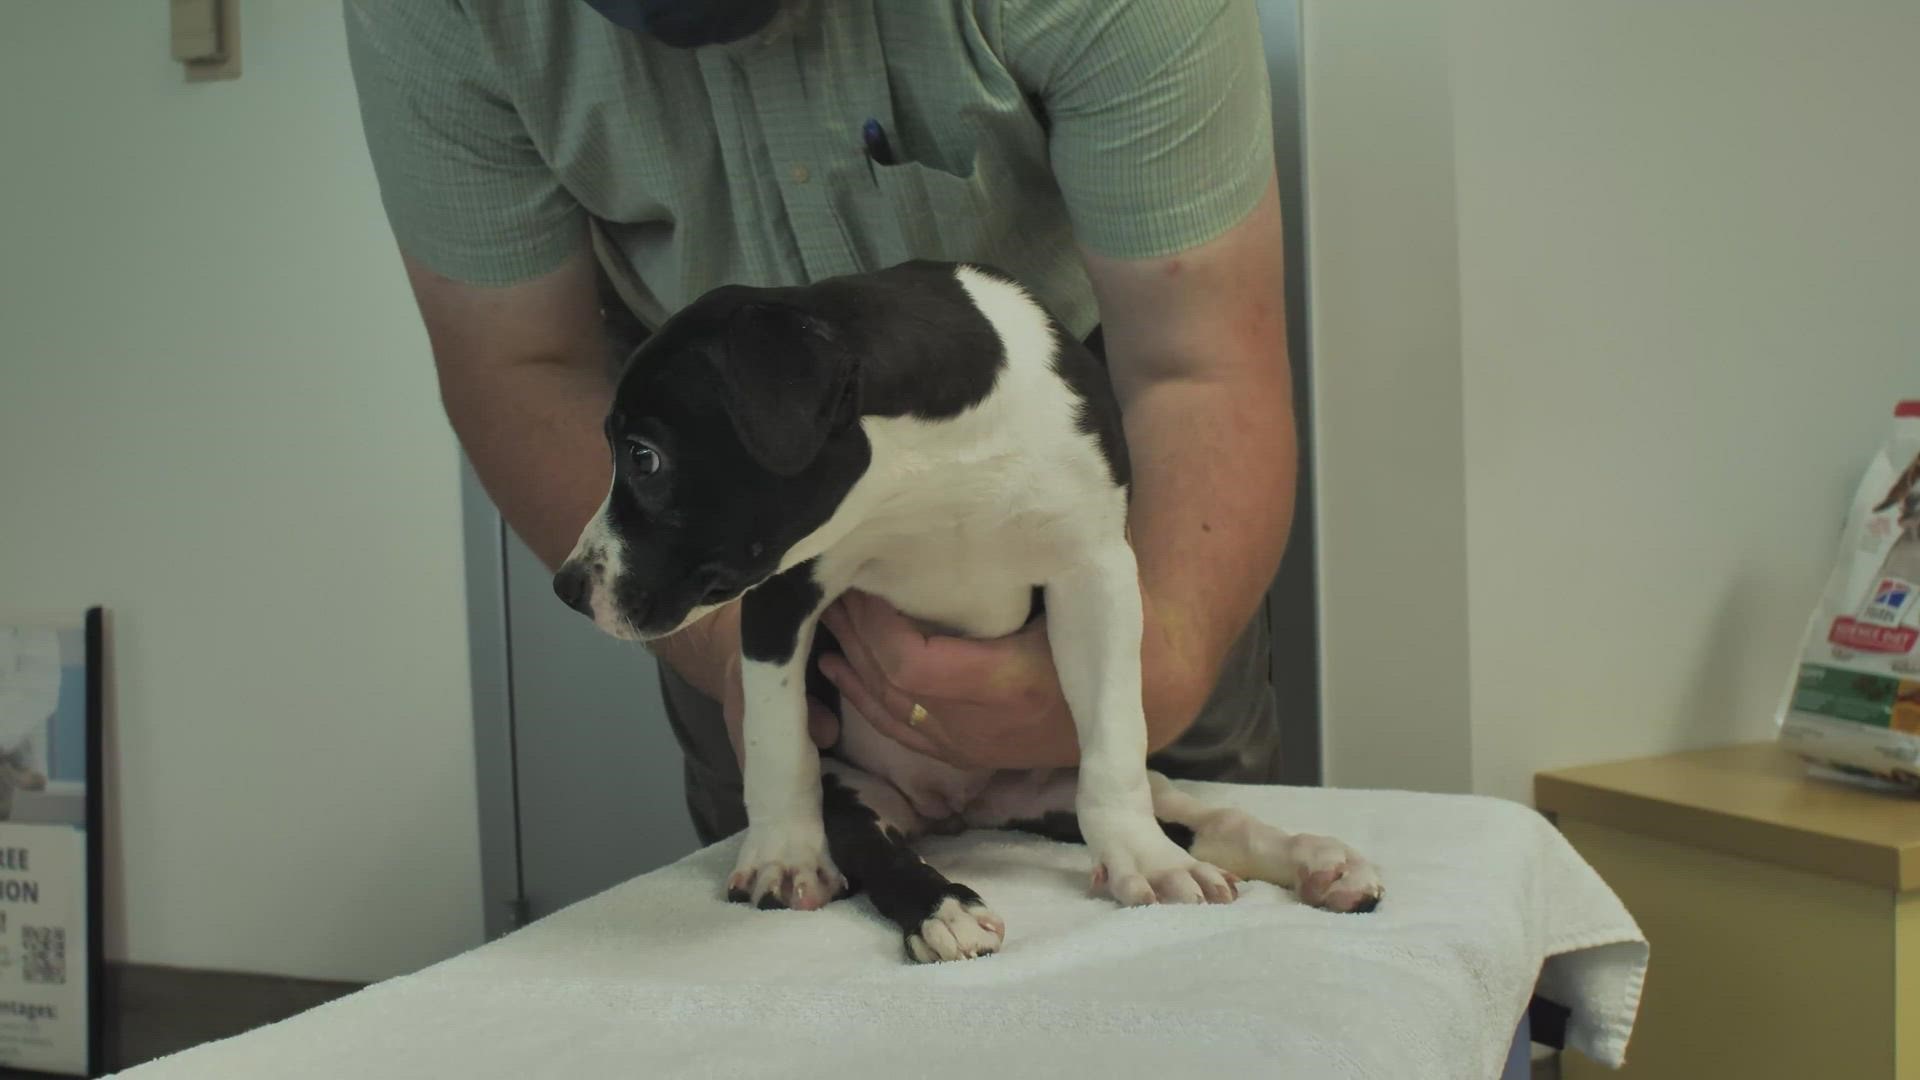 Suzy Q is learning how to walk with hopes of being adopted to her forever home. (Video provided by the Humane Society of Missouri)